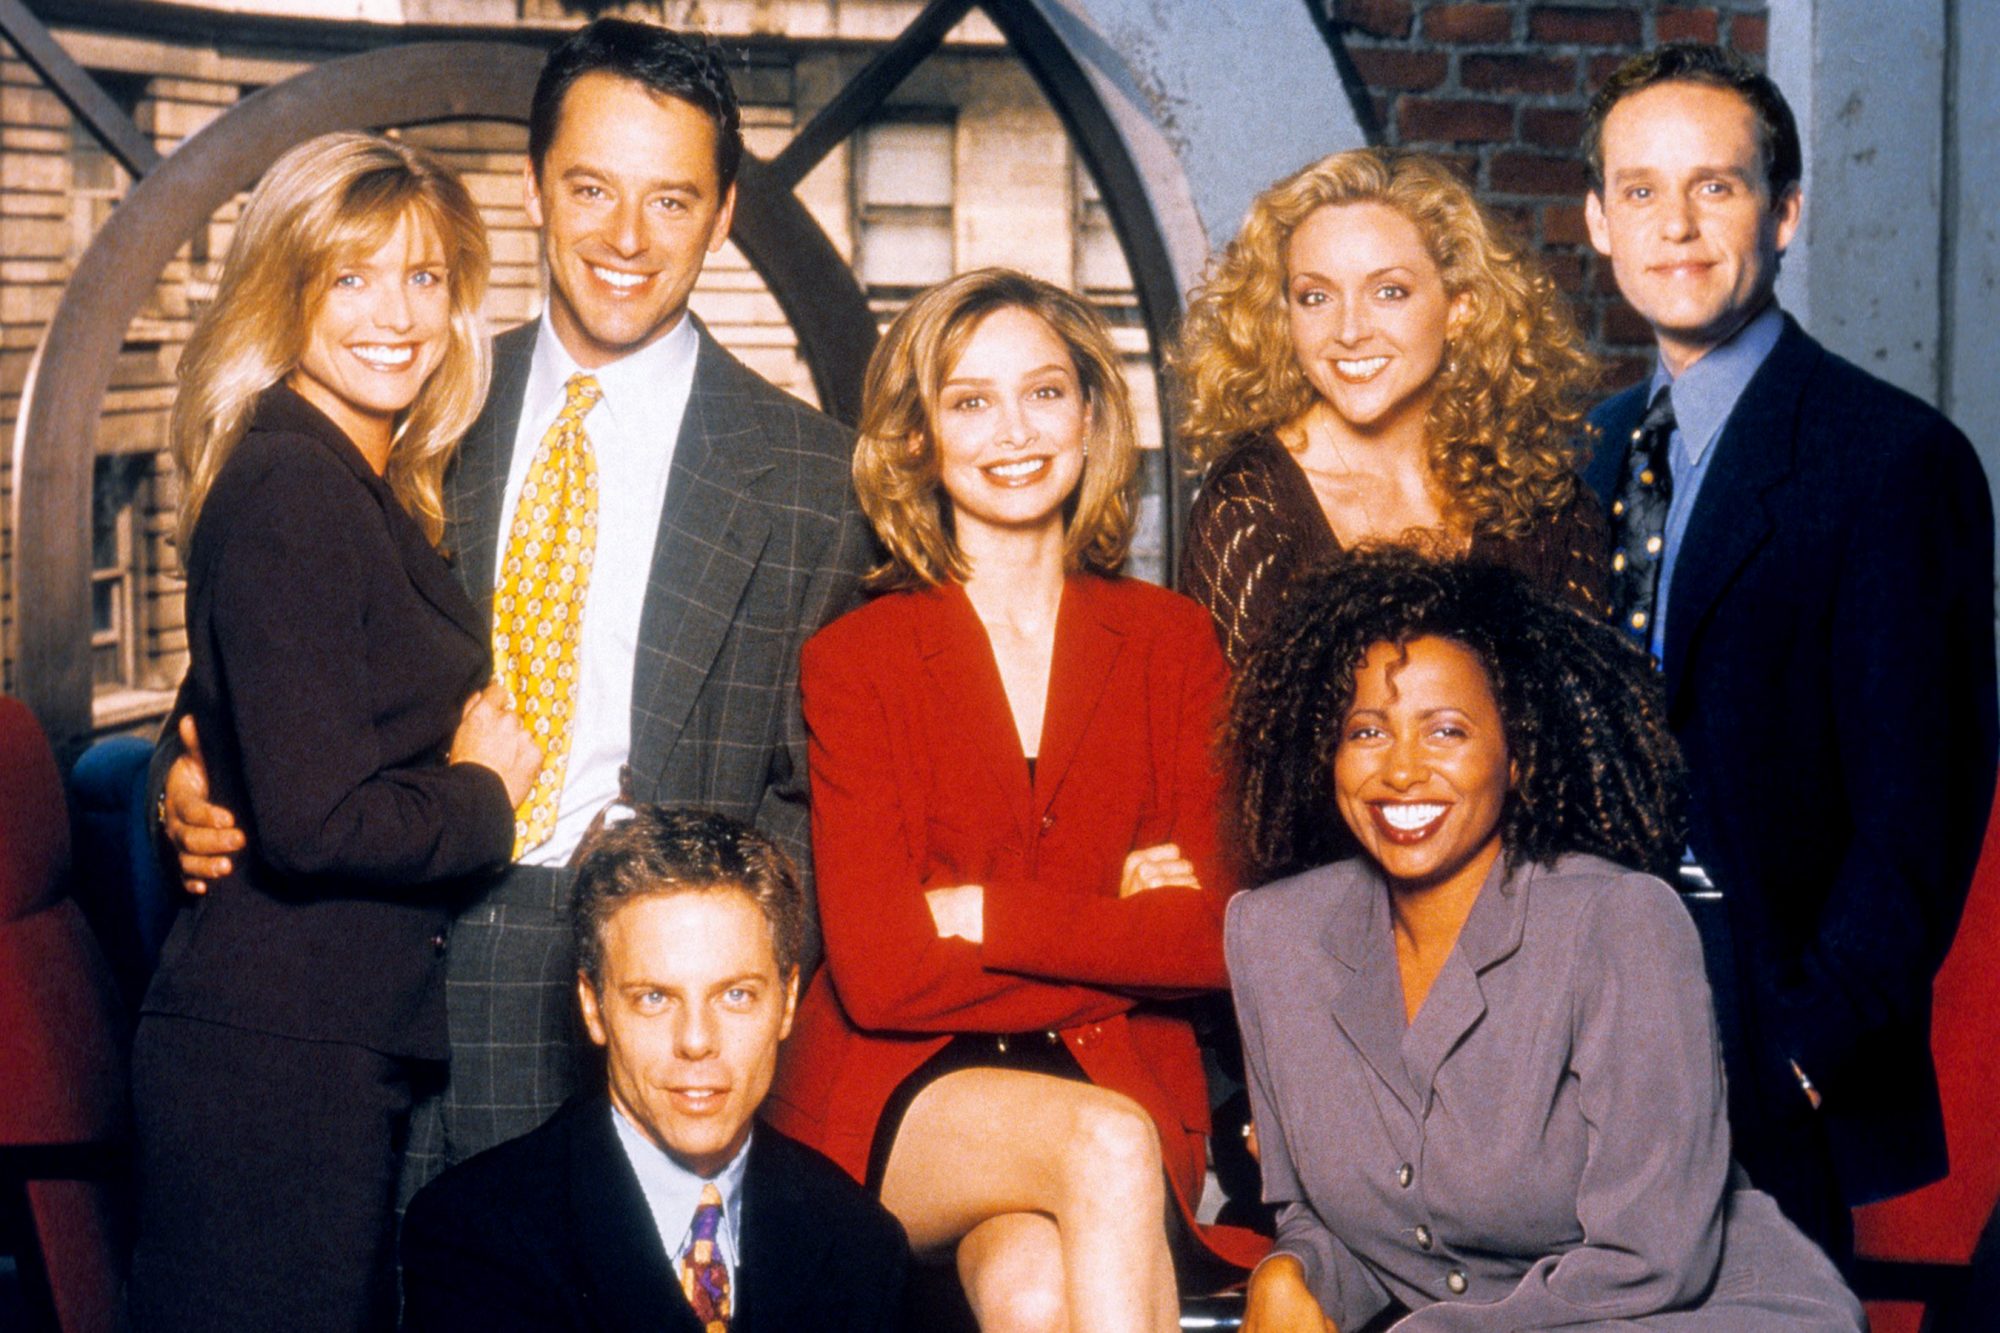 The main cast of Ally McBeal (1997-2002).